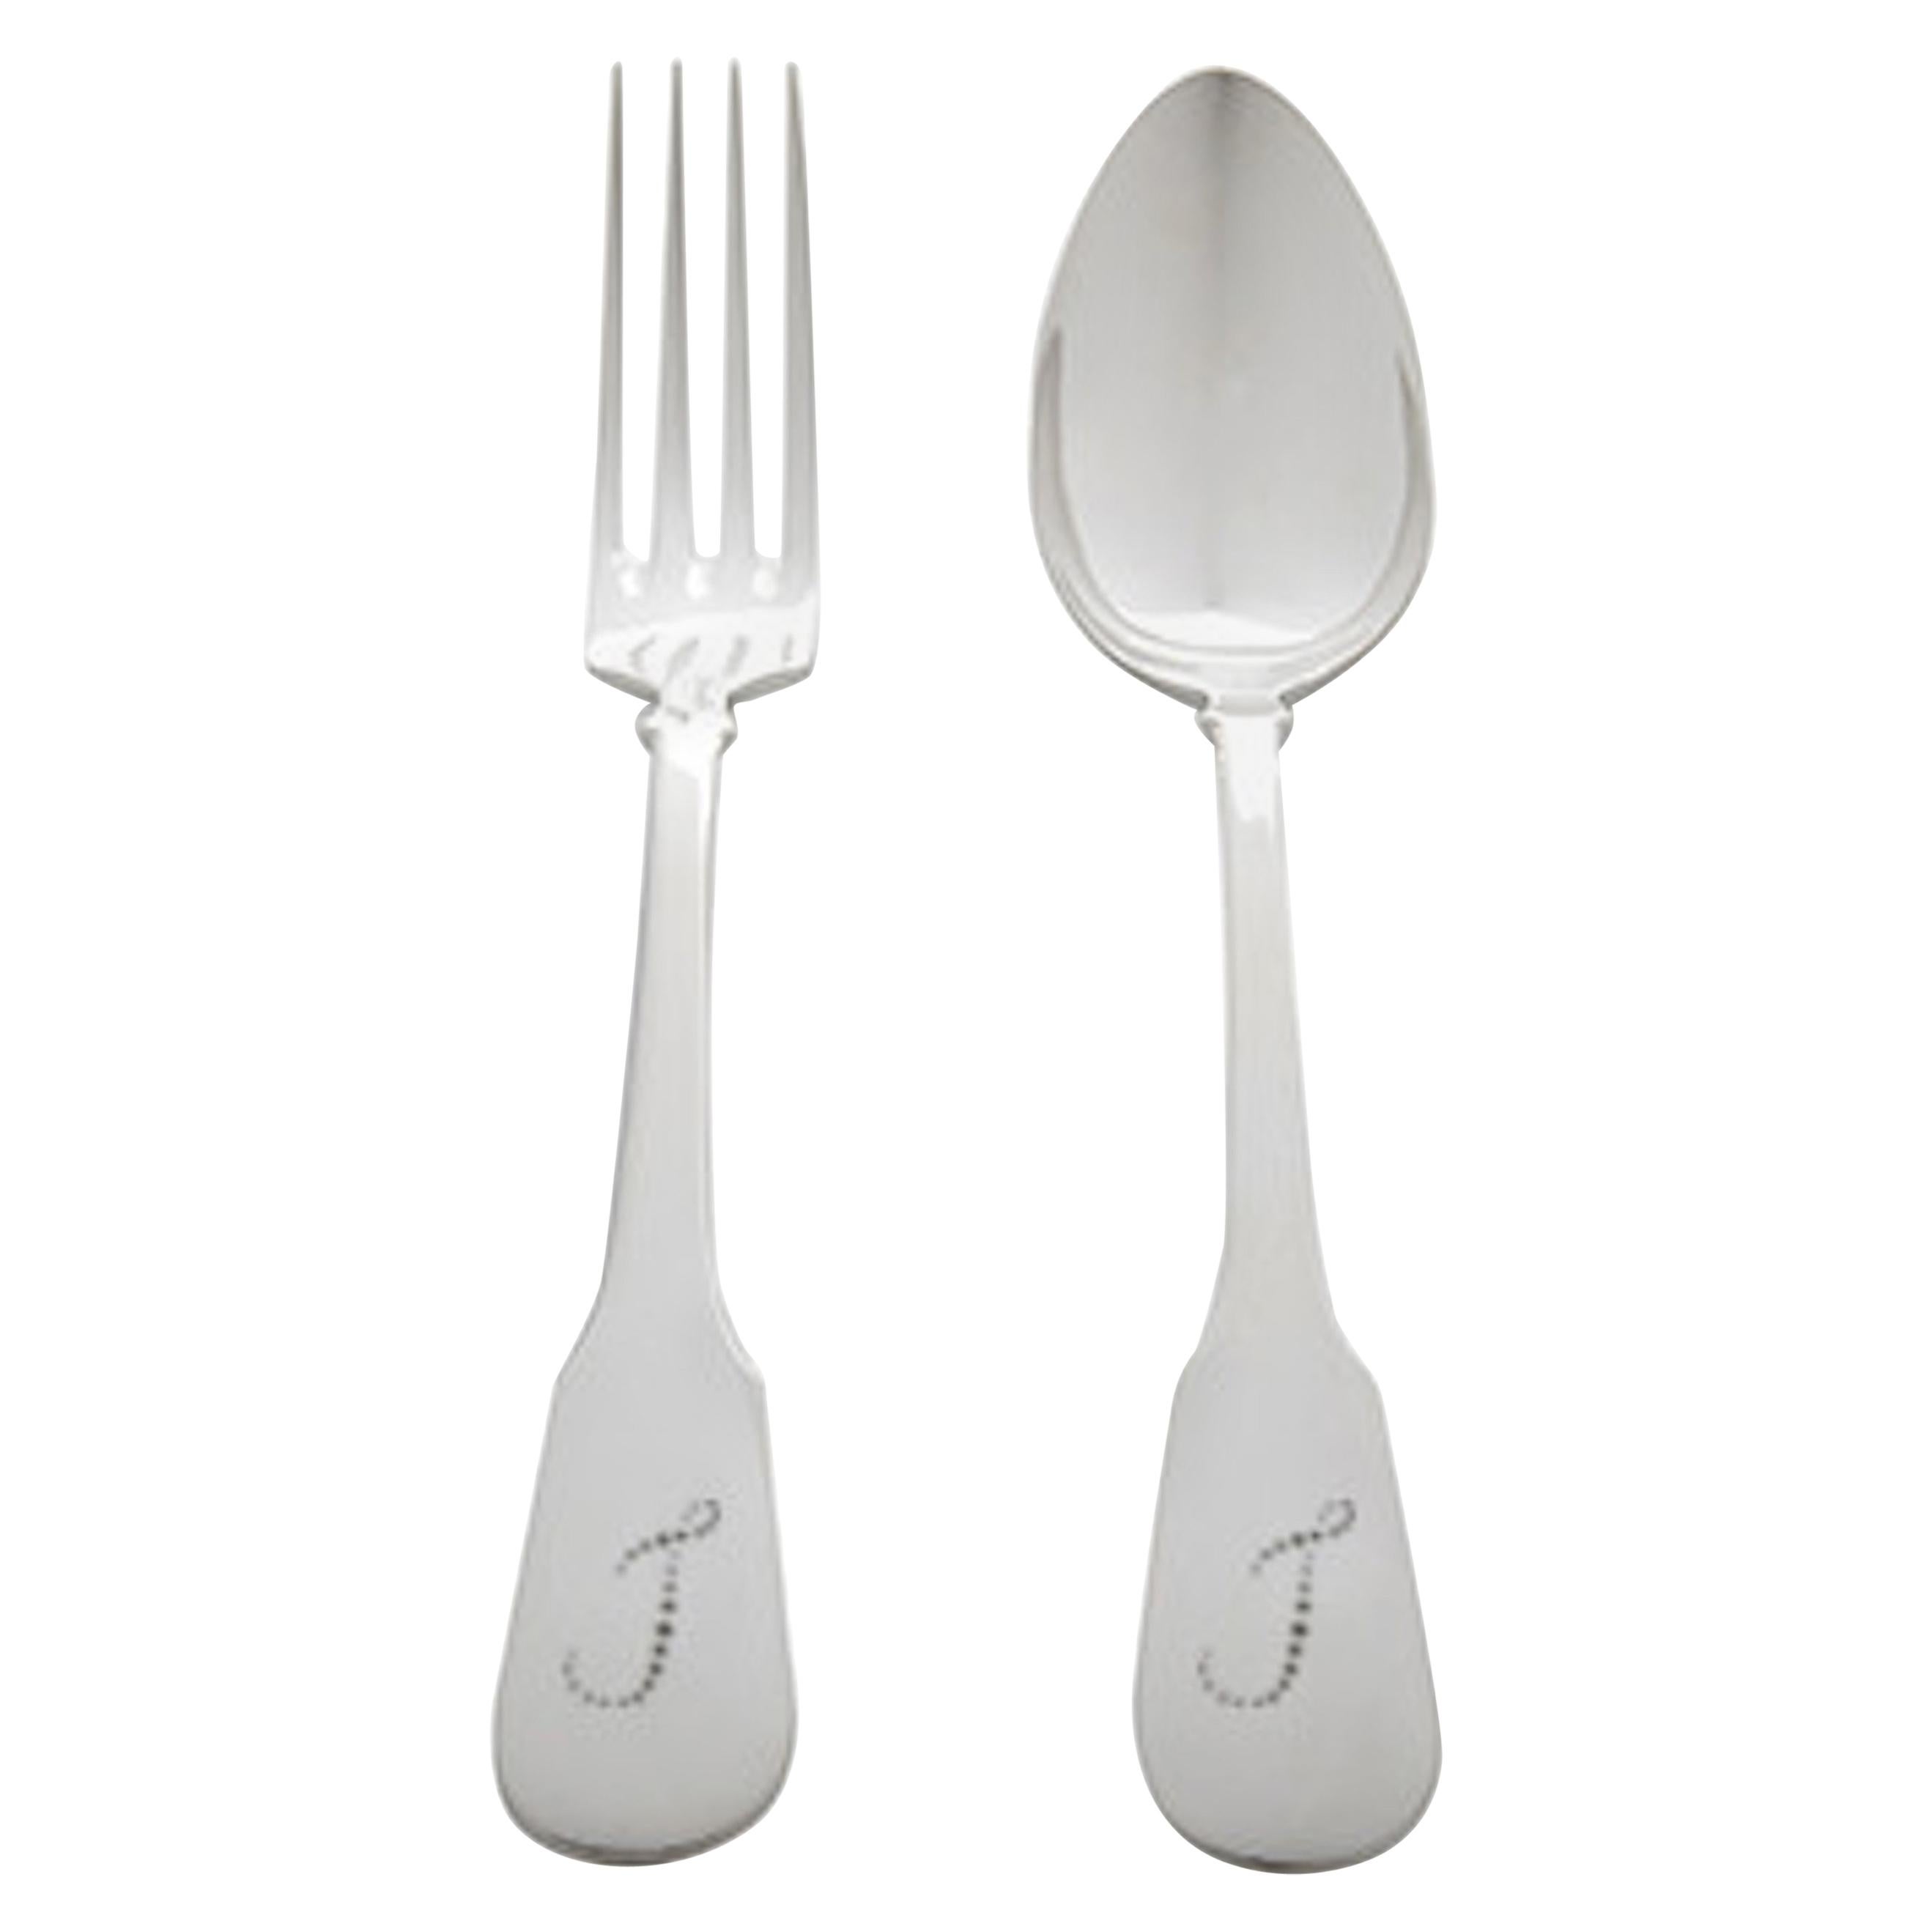 Julietta Serving Fork and Spoon by Julia B. For Sale